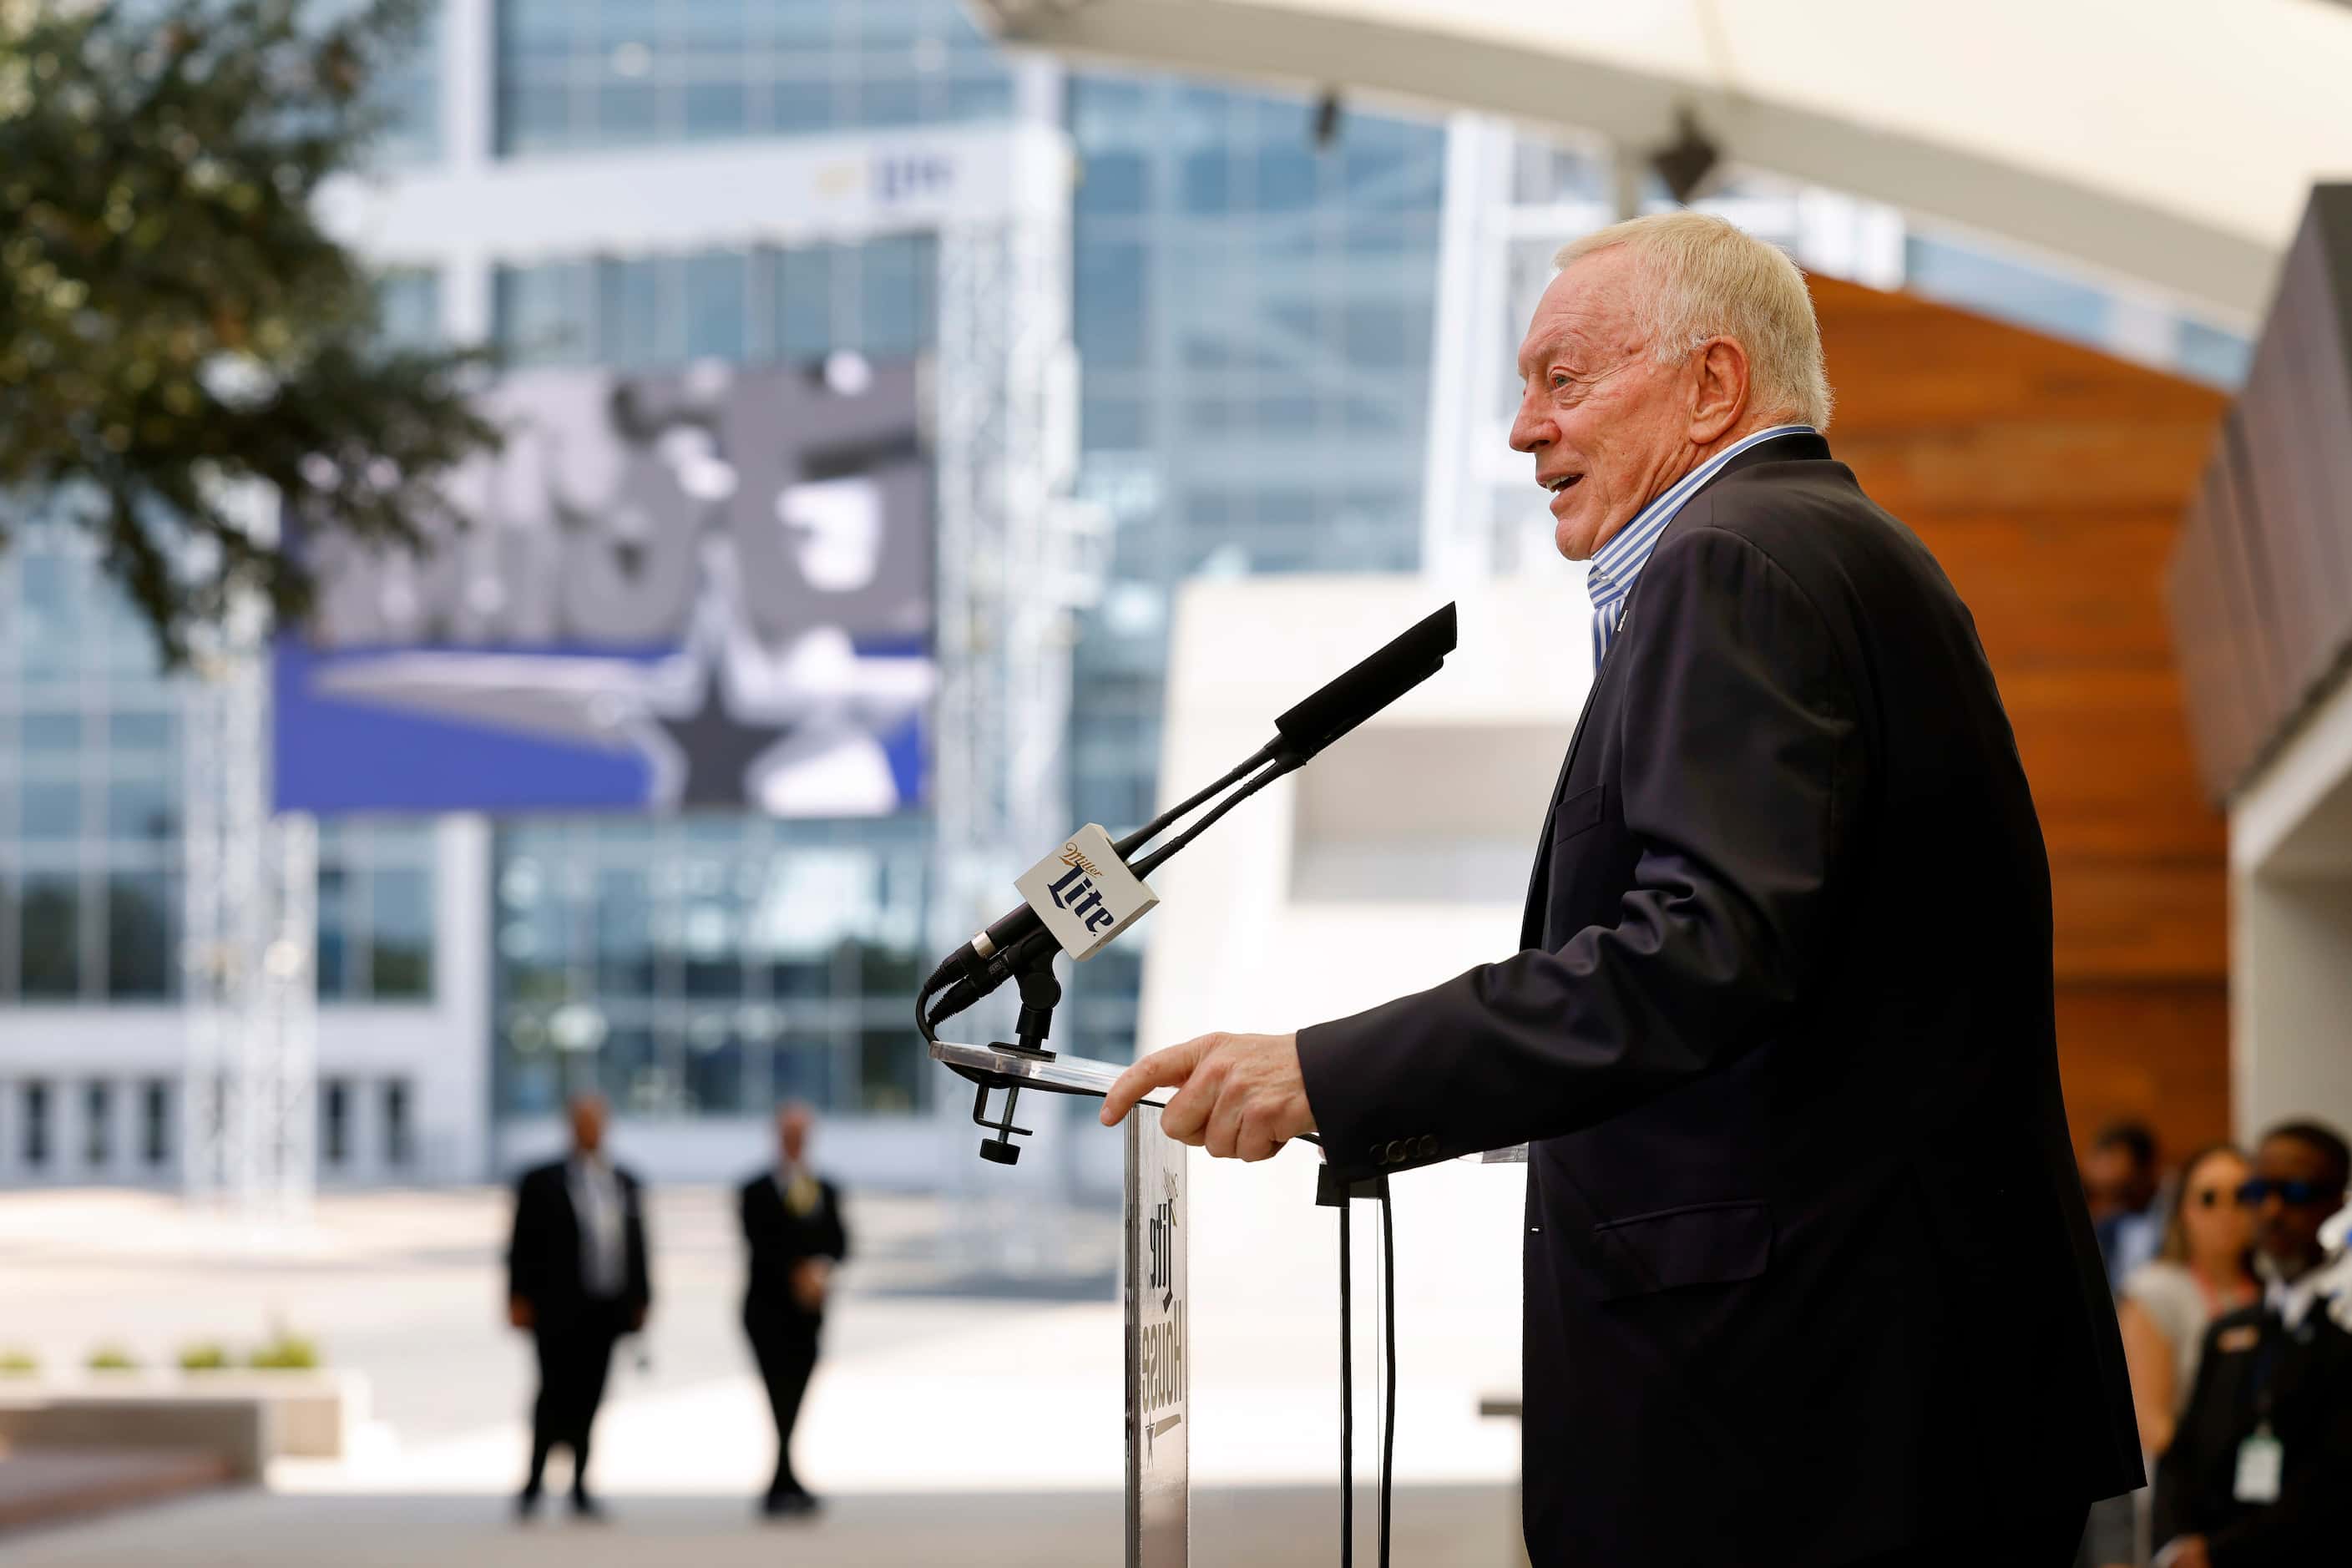 Dallas Cowboys owner Jerry Jones delivers remarks about the new constructed Miller LiteHouse...